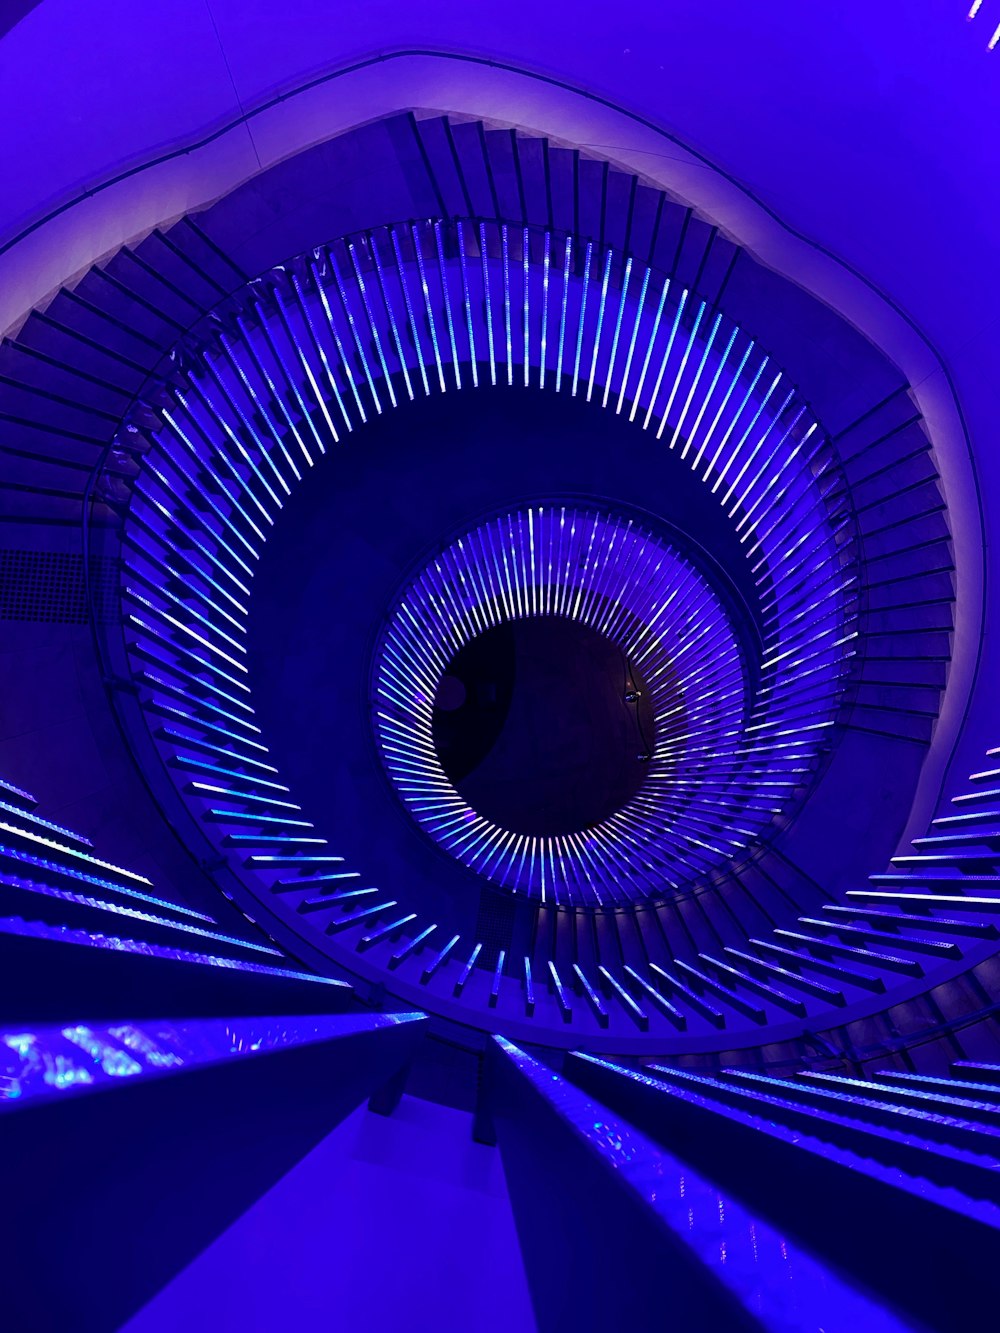 a spiral staircase in a building with blue lights